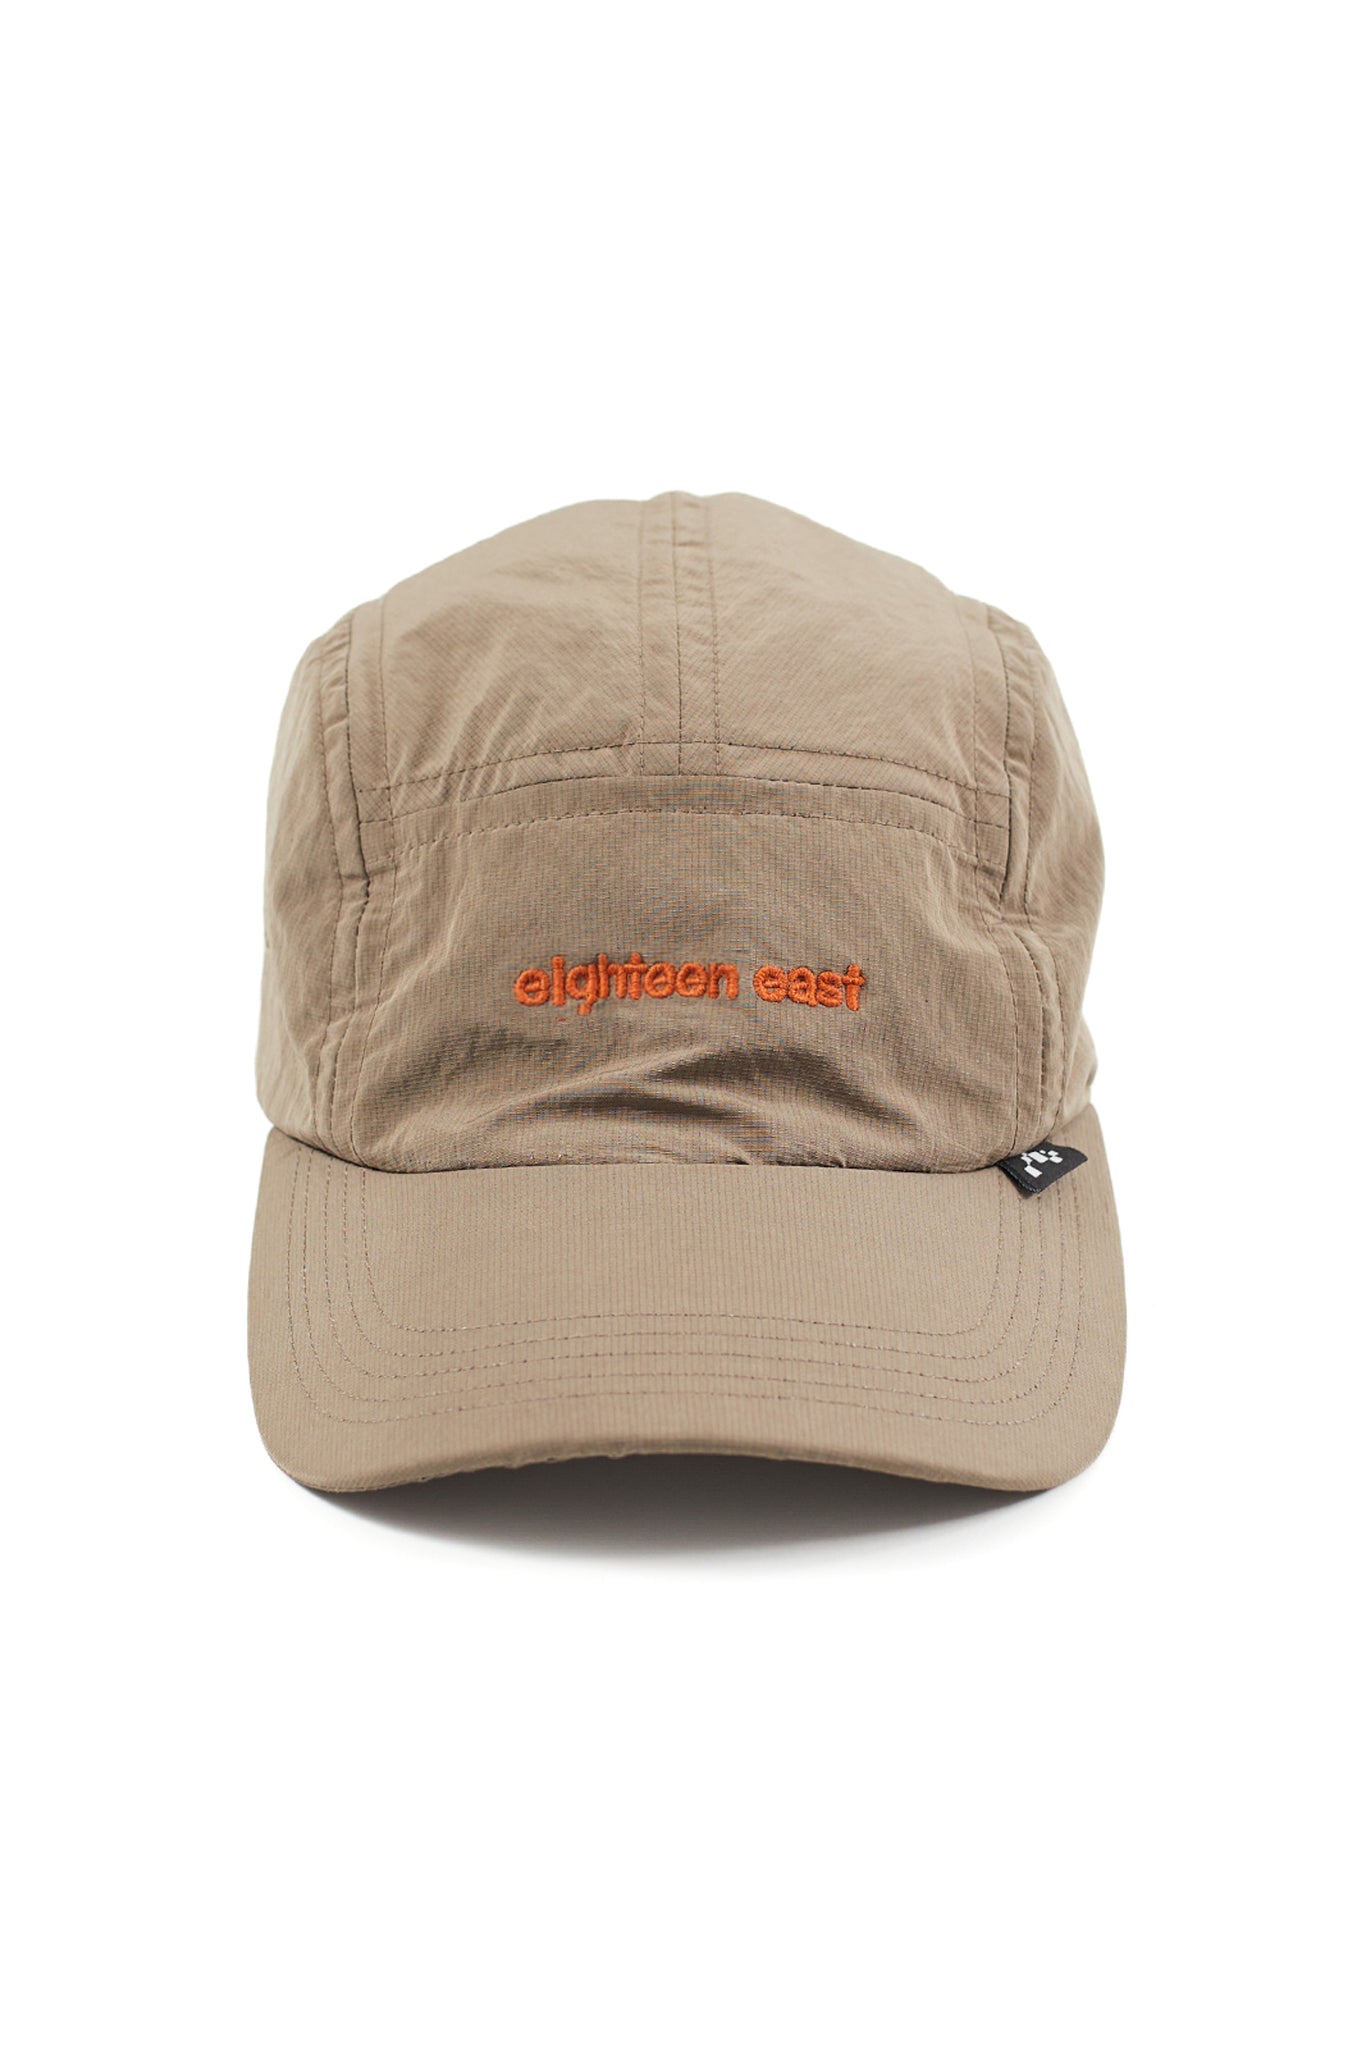 RAINSHADOW OUTDOOR PROTECTION SYSTEM CINCH BACK CAMP HAT - SILT WATER-REPELLENT MICRO RIPSTOP NYLON